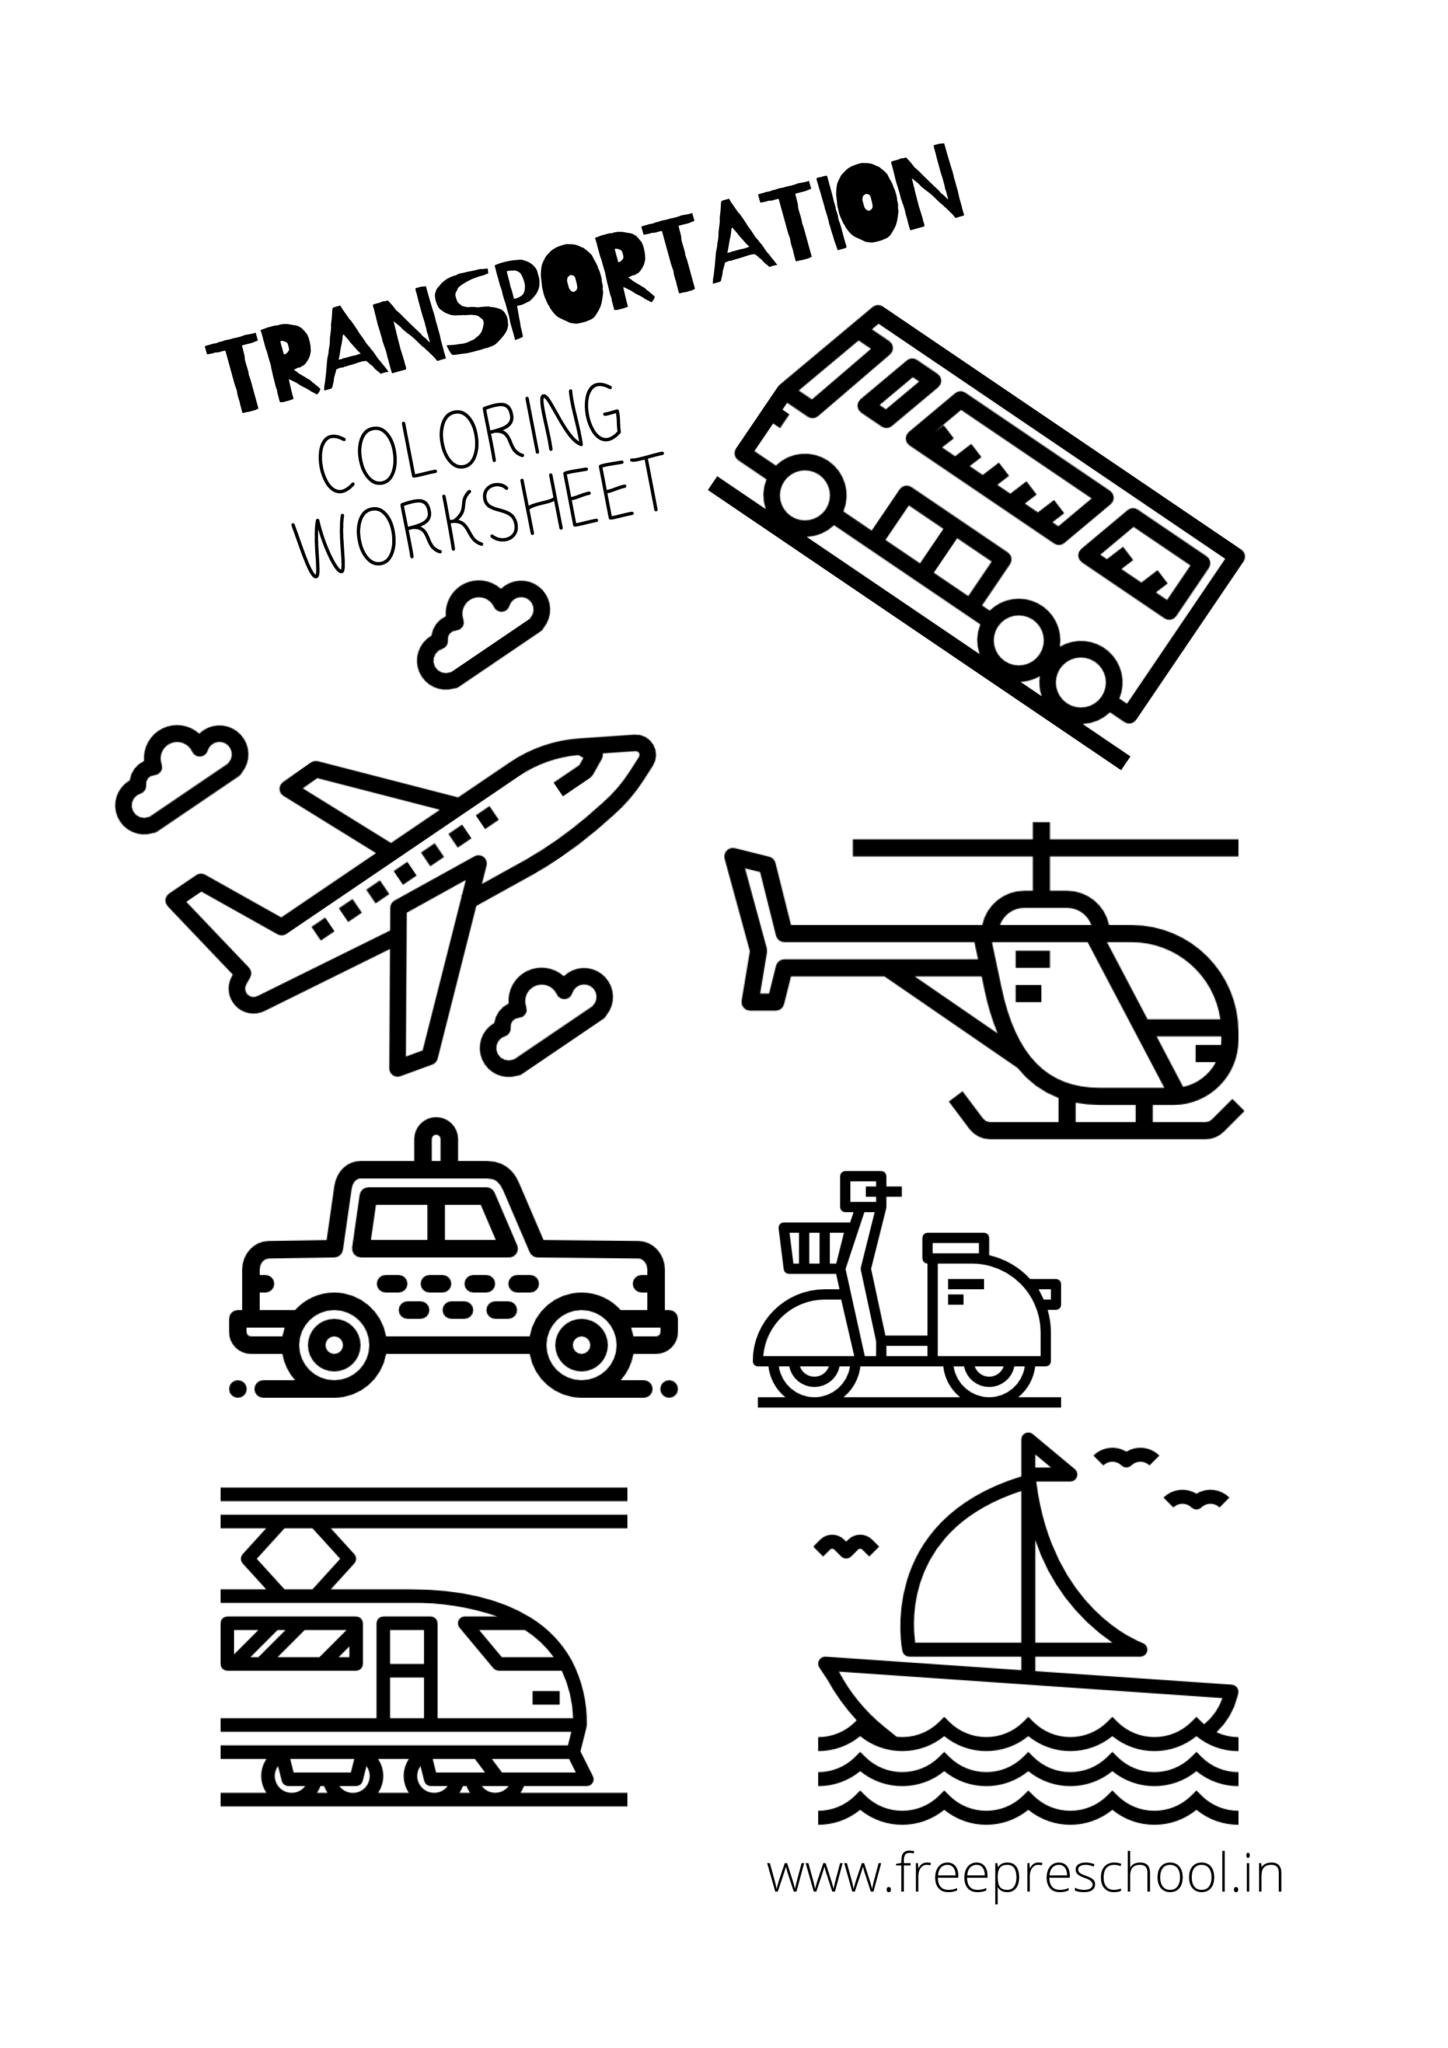 6+ Coloring Pages of Transportation - Free Preschool